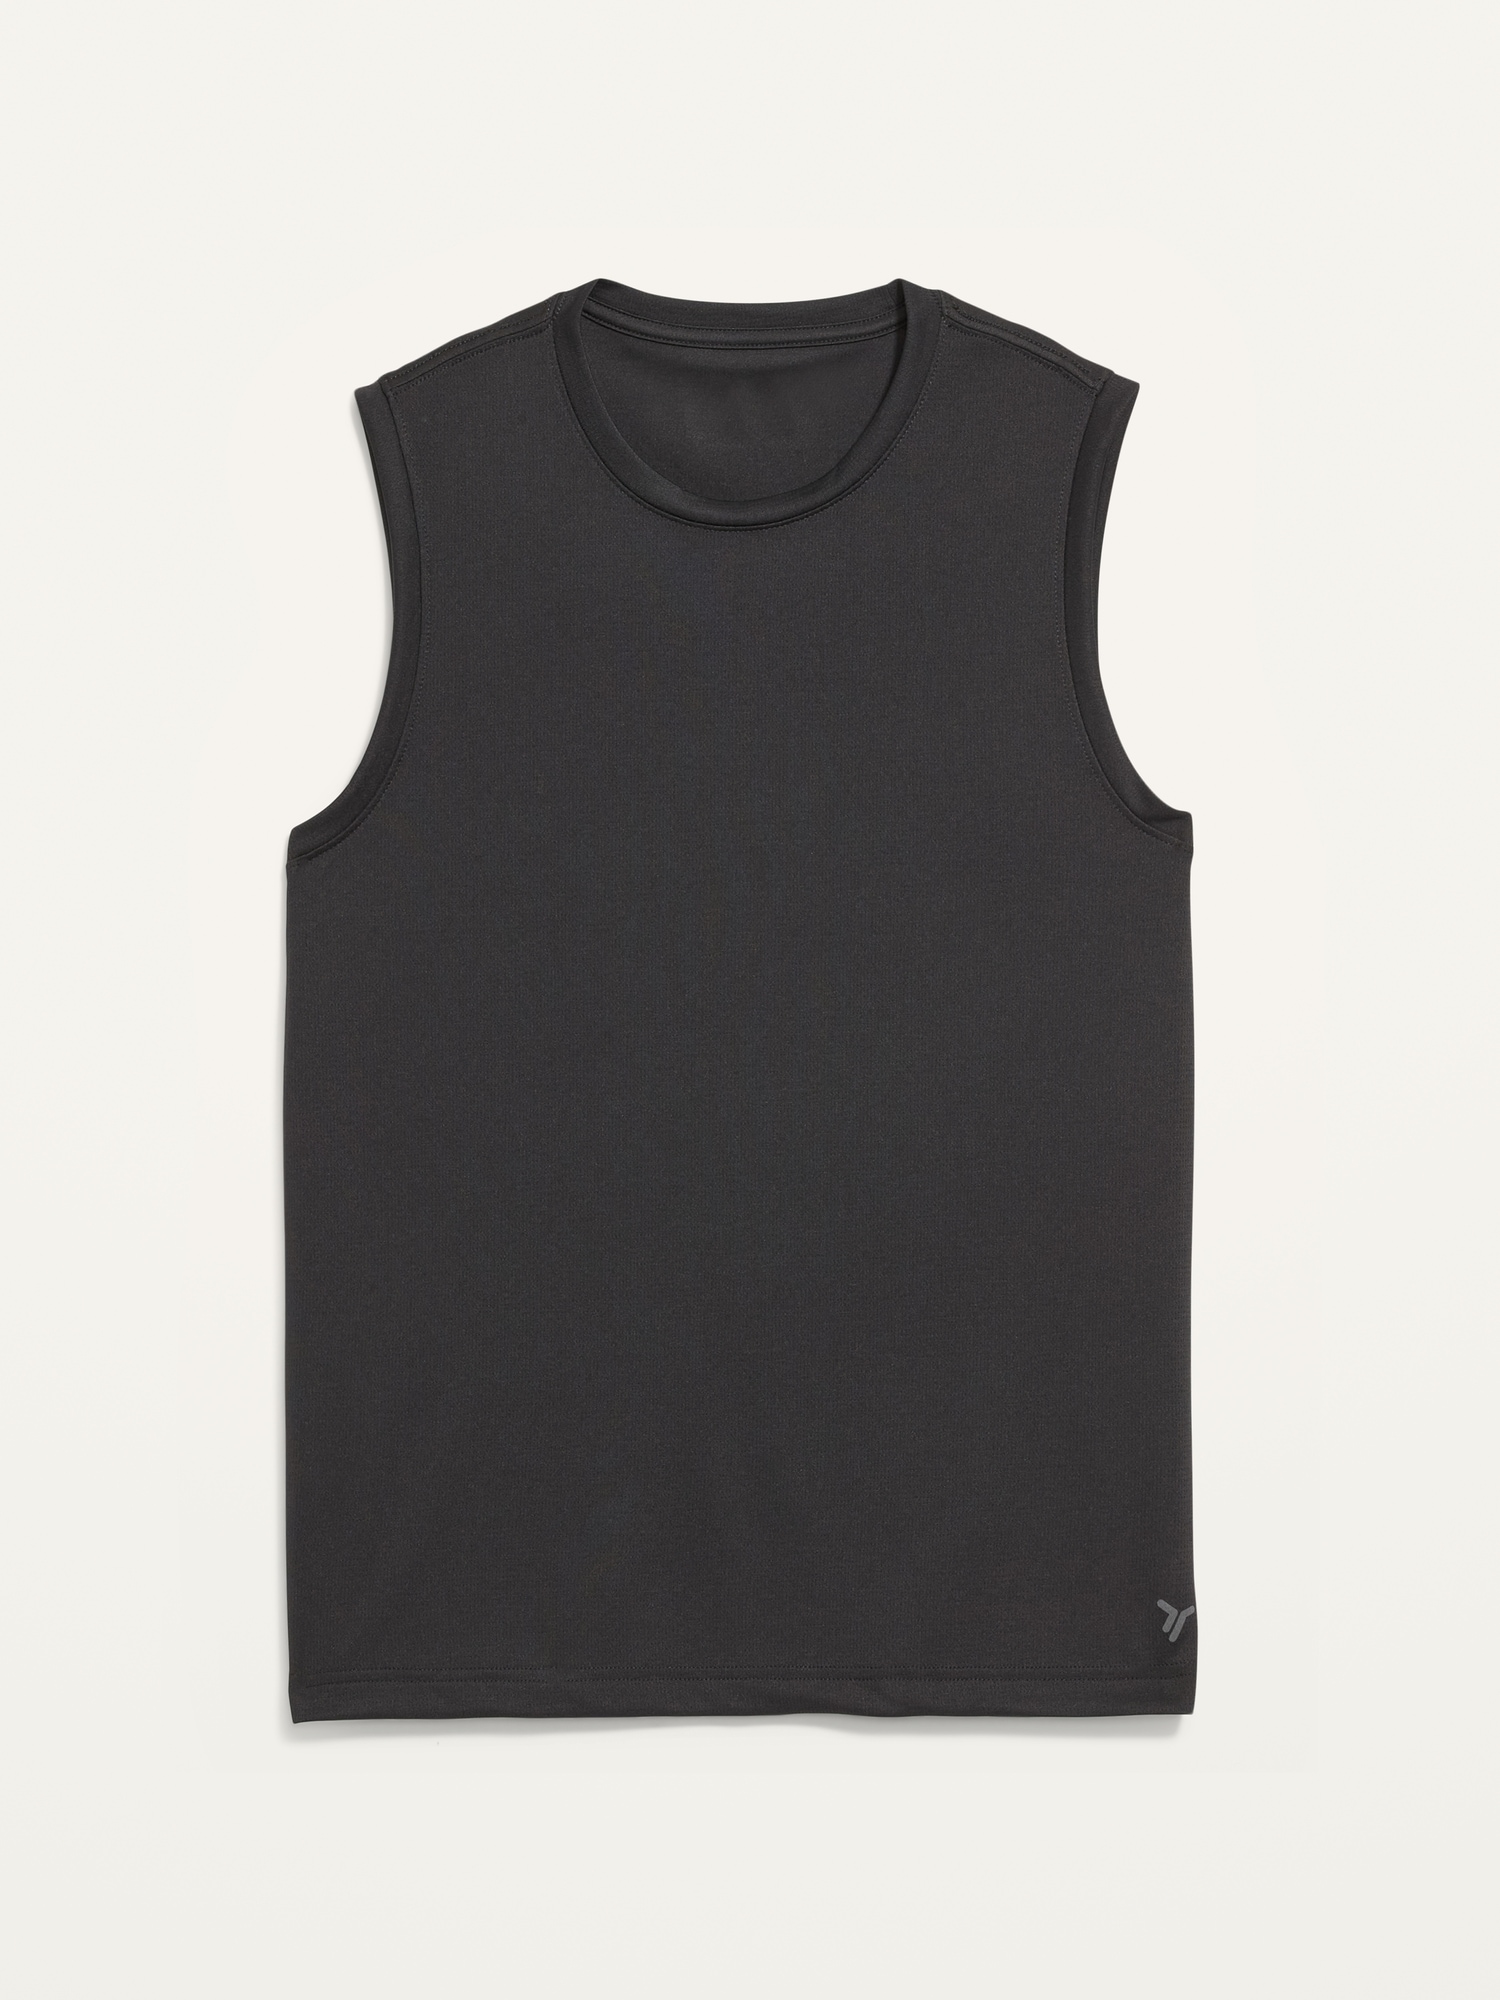 Moisture-Wicking A4 Men’s Cooling Performance Muscle Tank Top